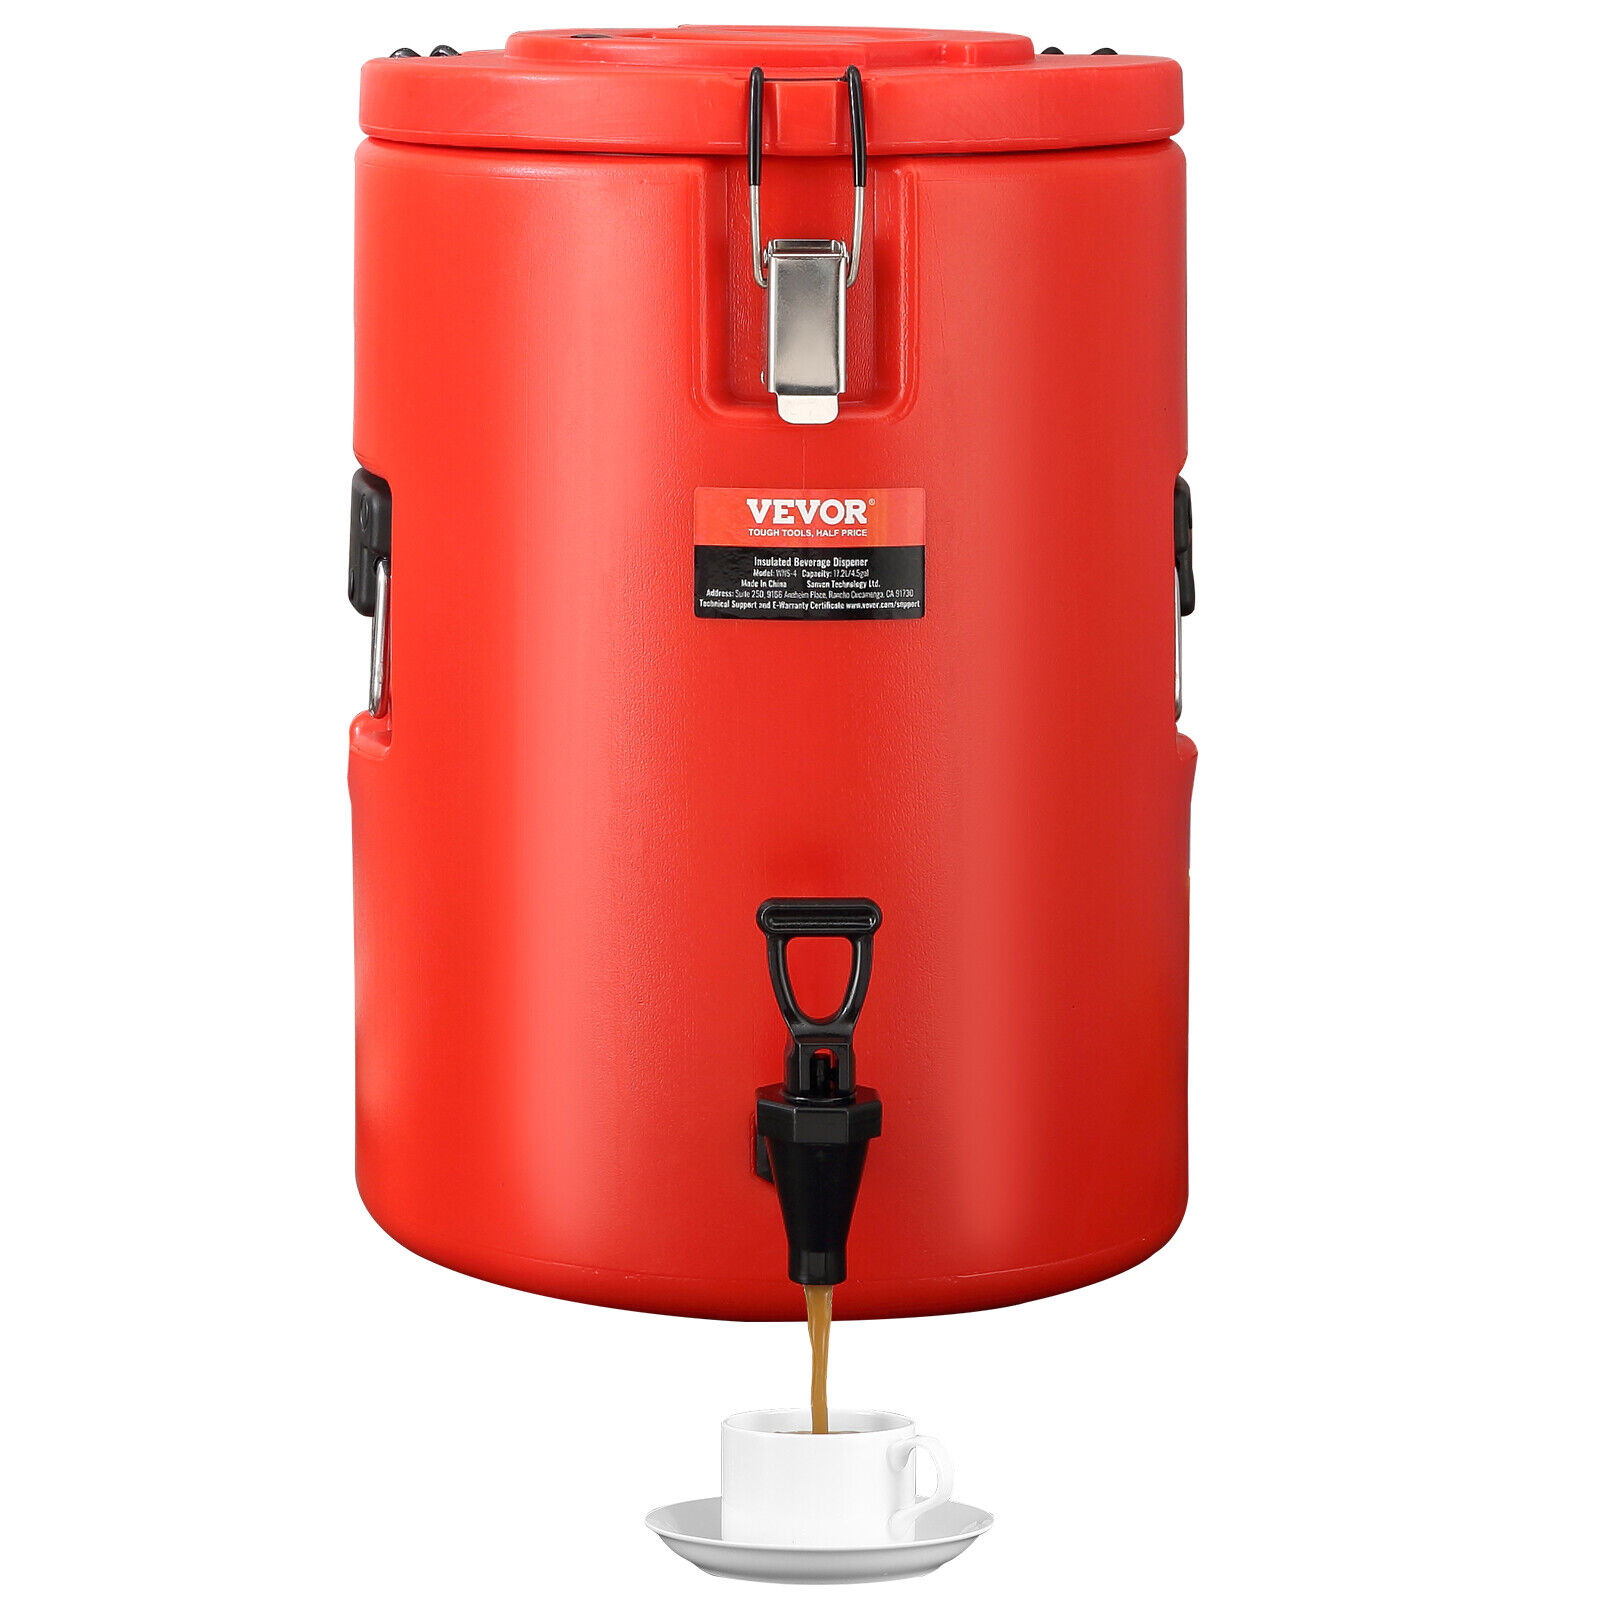 VEVOR Insulated Hot and Cold Beverage Dispenser Server 4.5Gallon Stainless Steel